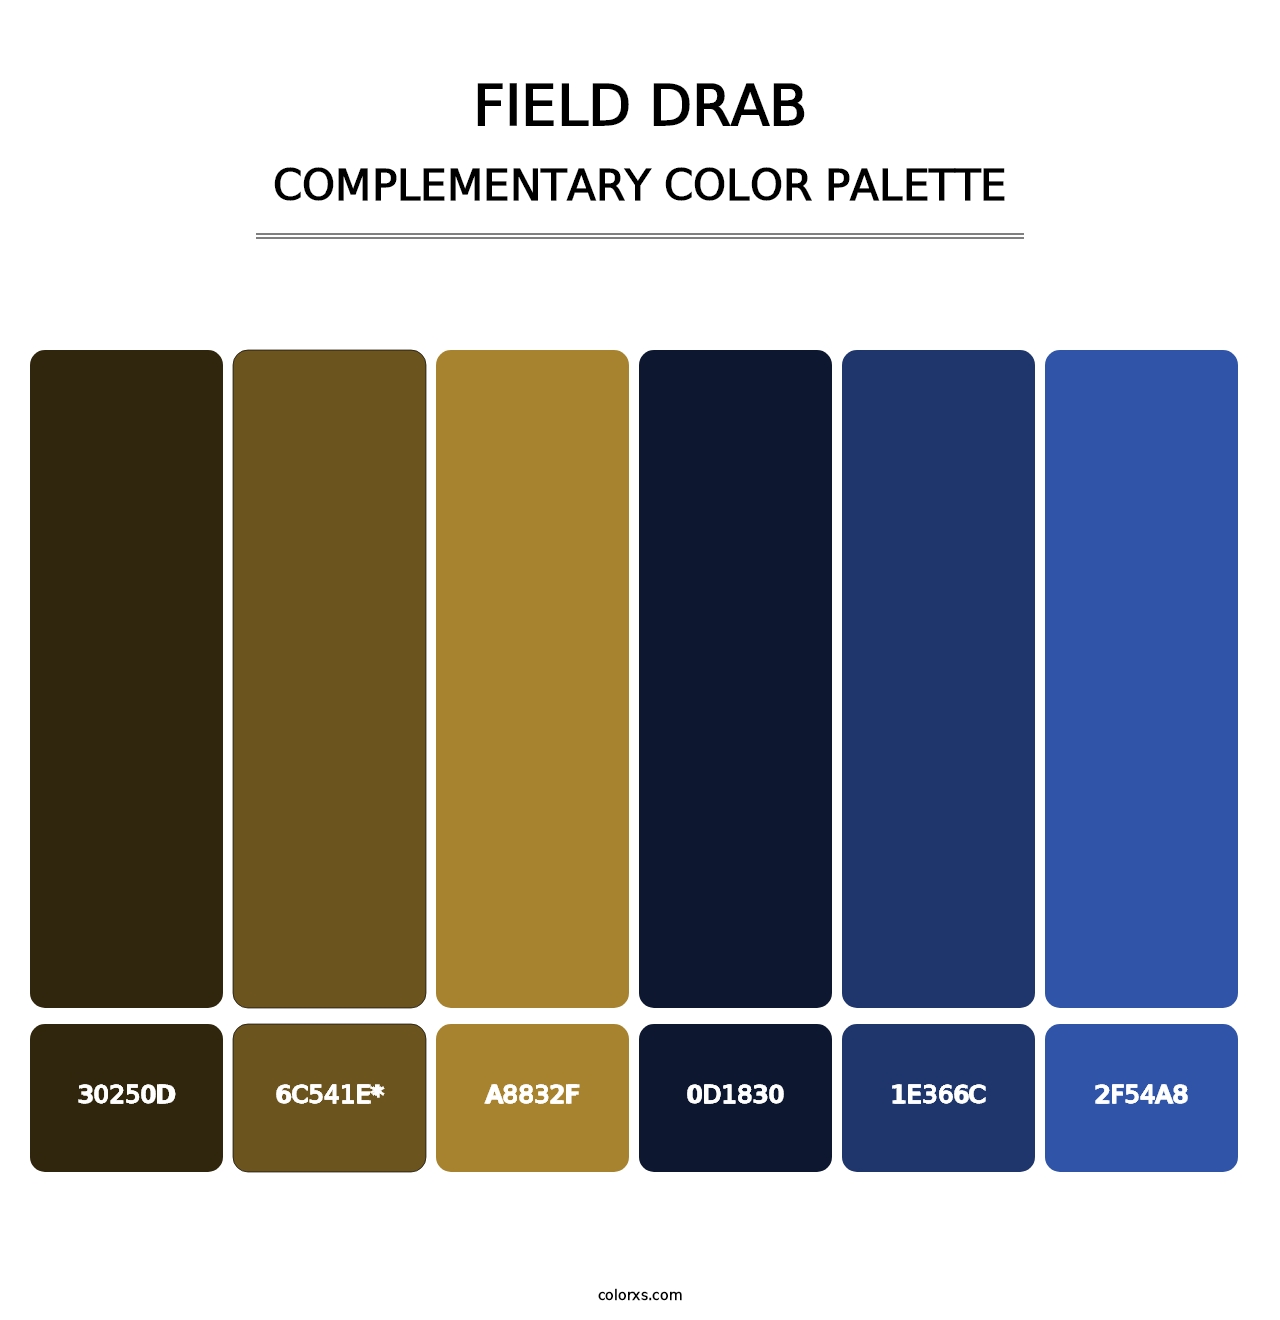 Field Drab - Complementary Color Palette